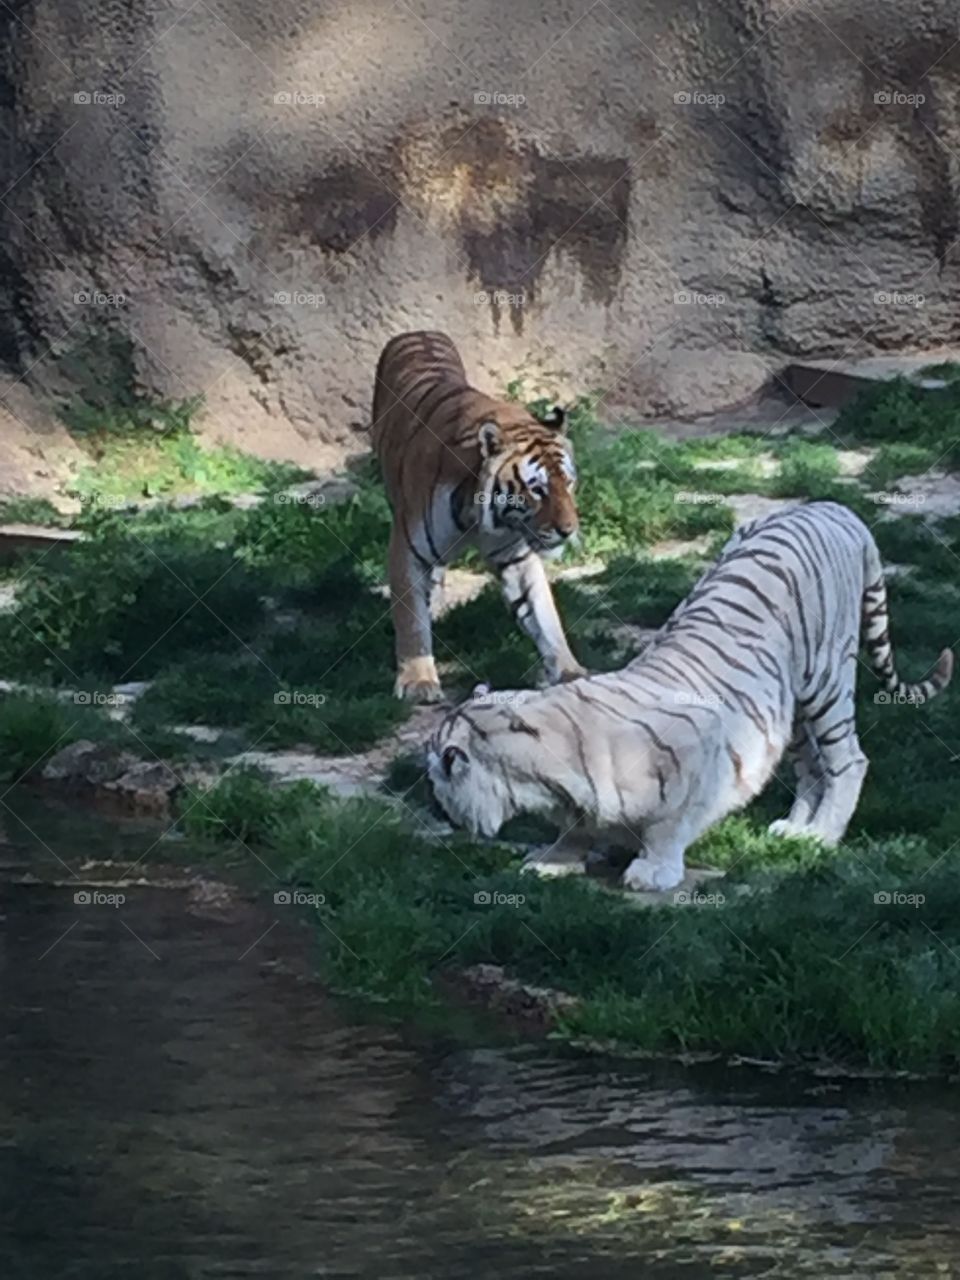 Tigers at the Memphis Zoo 